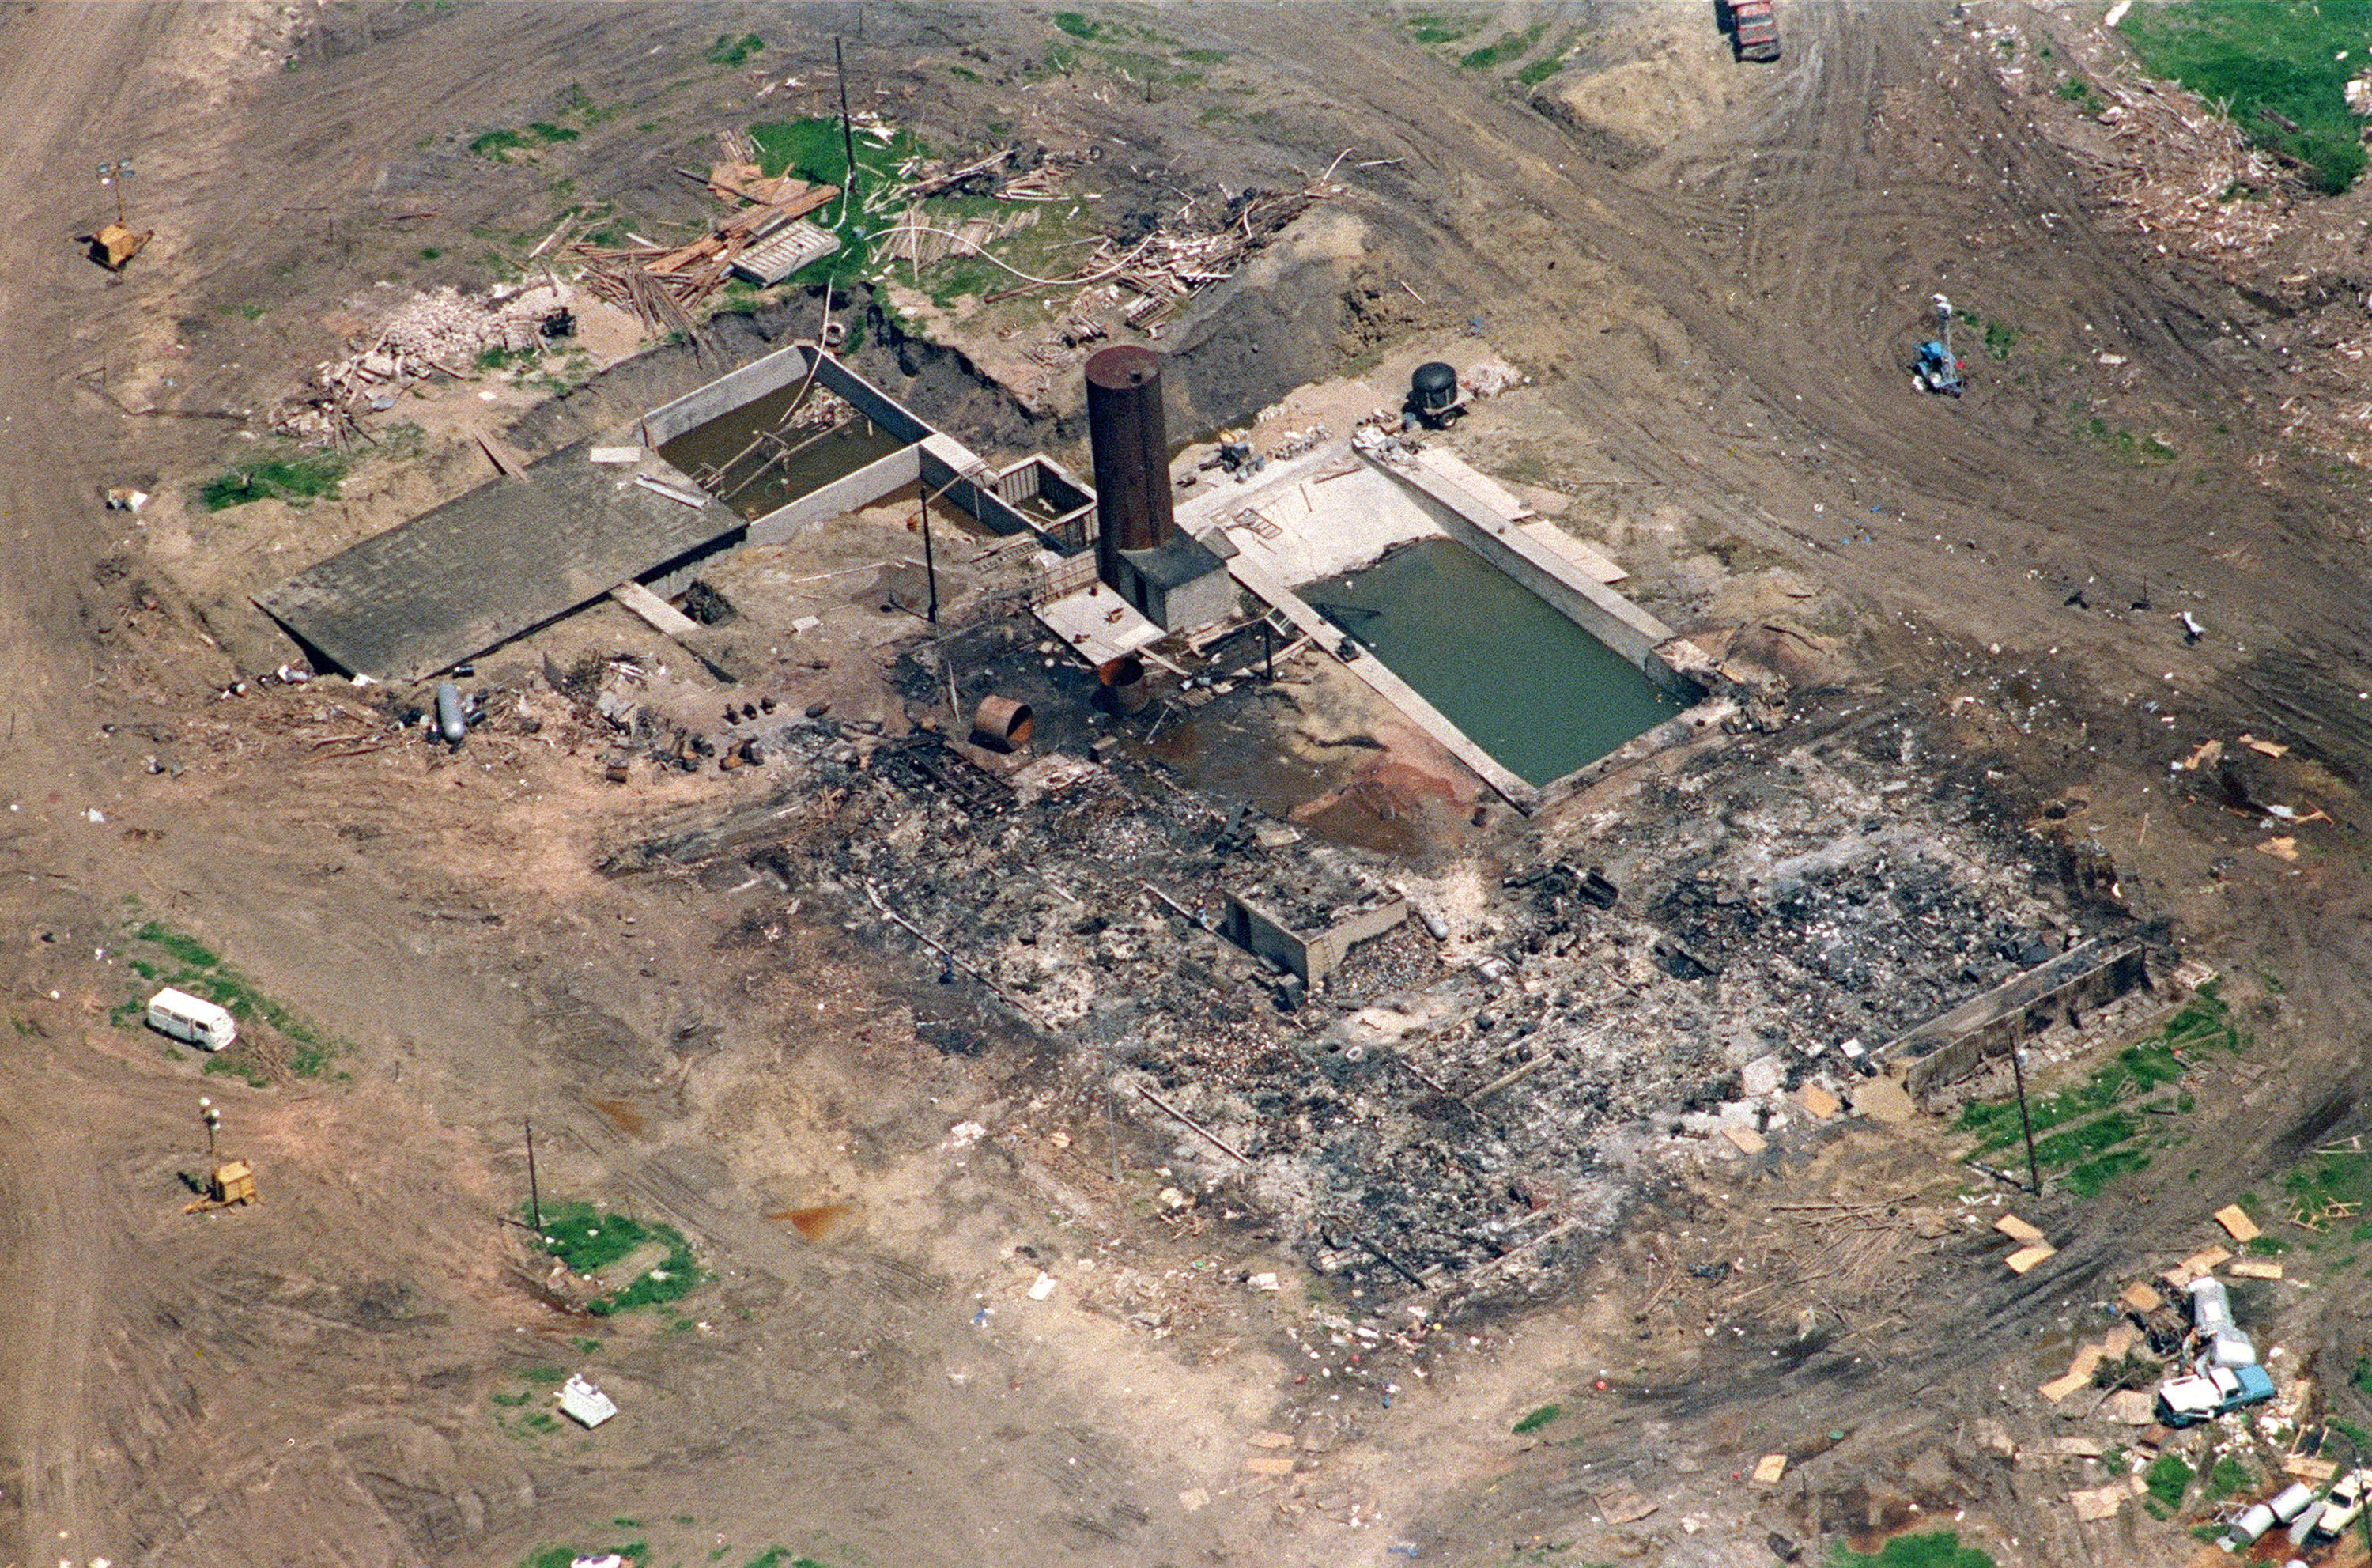 This aerial shot taken 21 April 1993 in Waco shows the burnt remains of the only structure left standing after a fire destroyed the The Branch Davidian cult compound